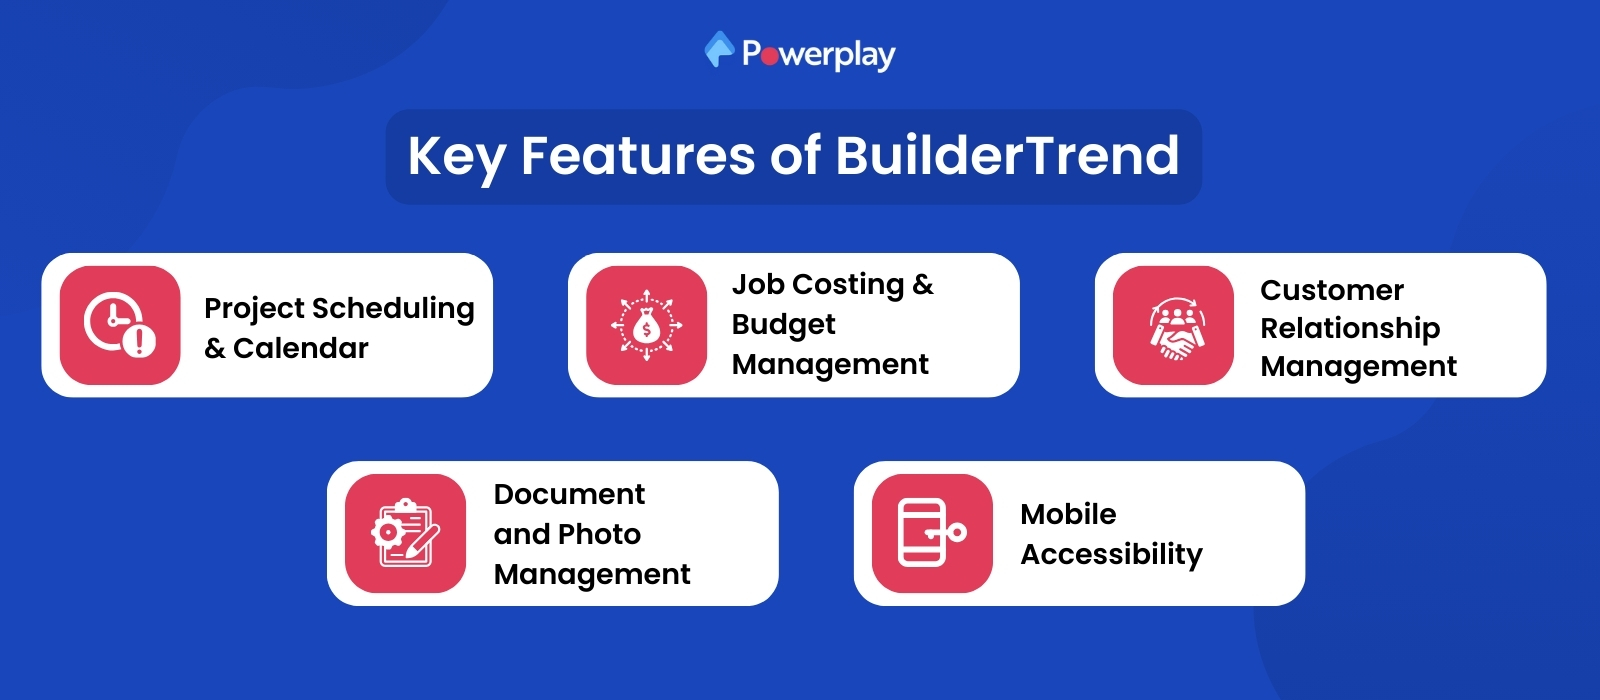 Key features of Buildertrend